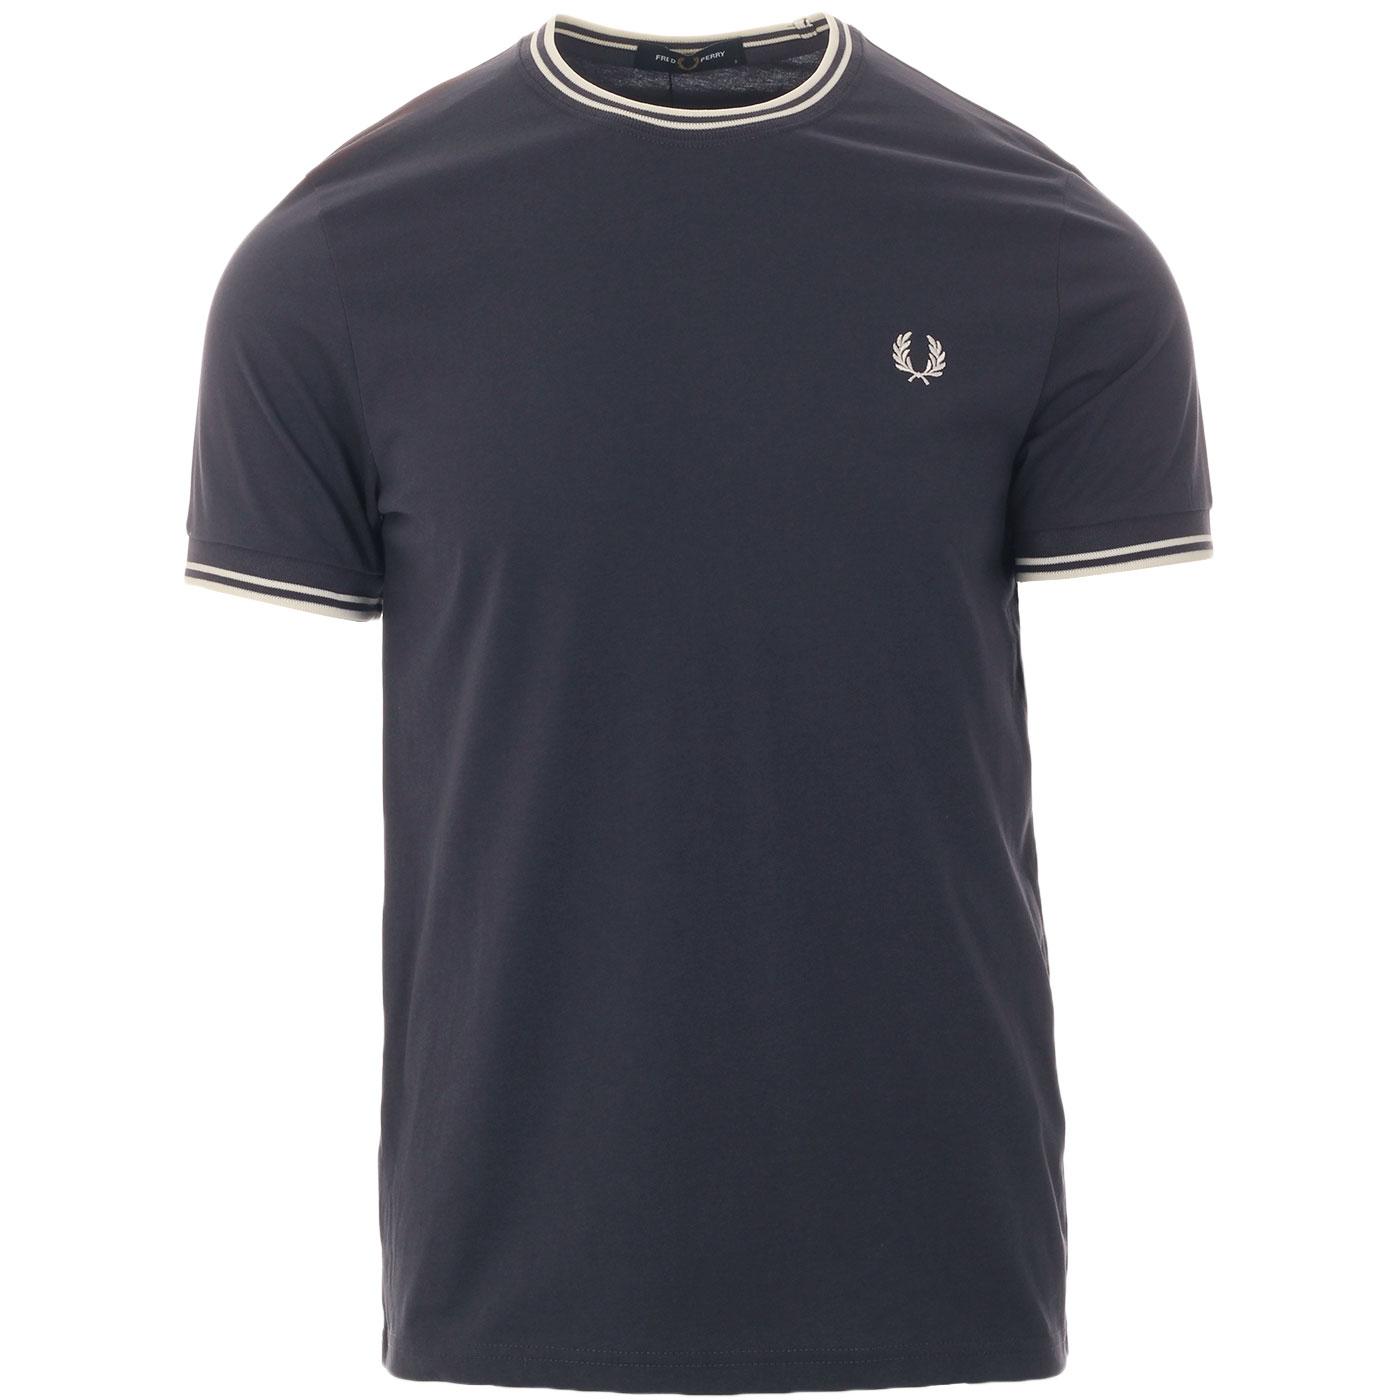 FRED PERRY M1588 Retro Twin Tipped T-Shirt (DG)